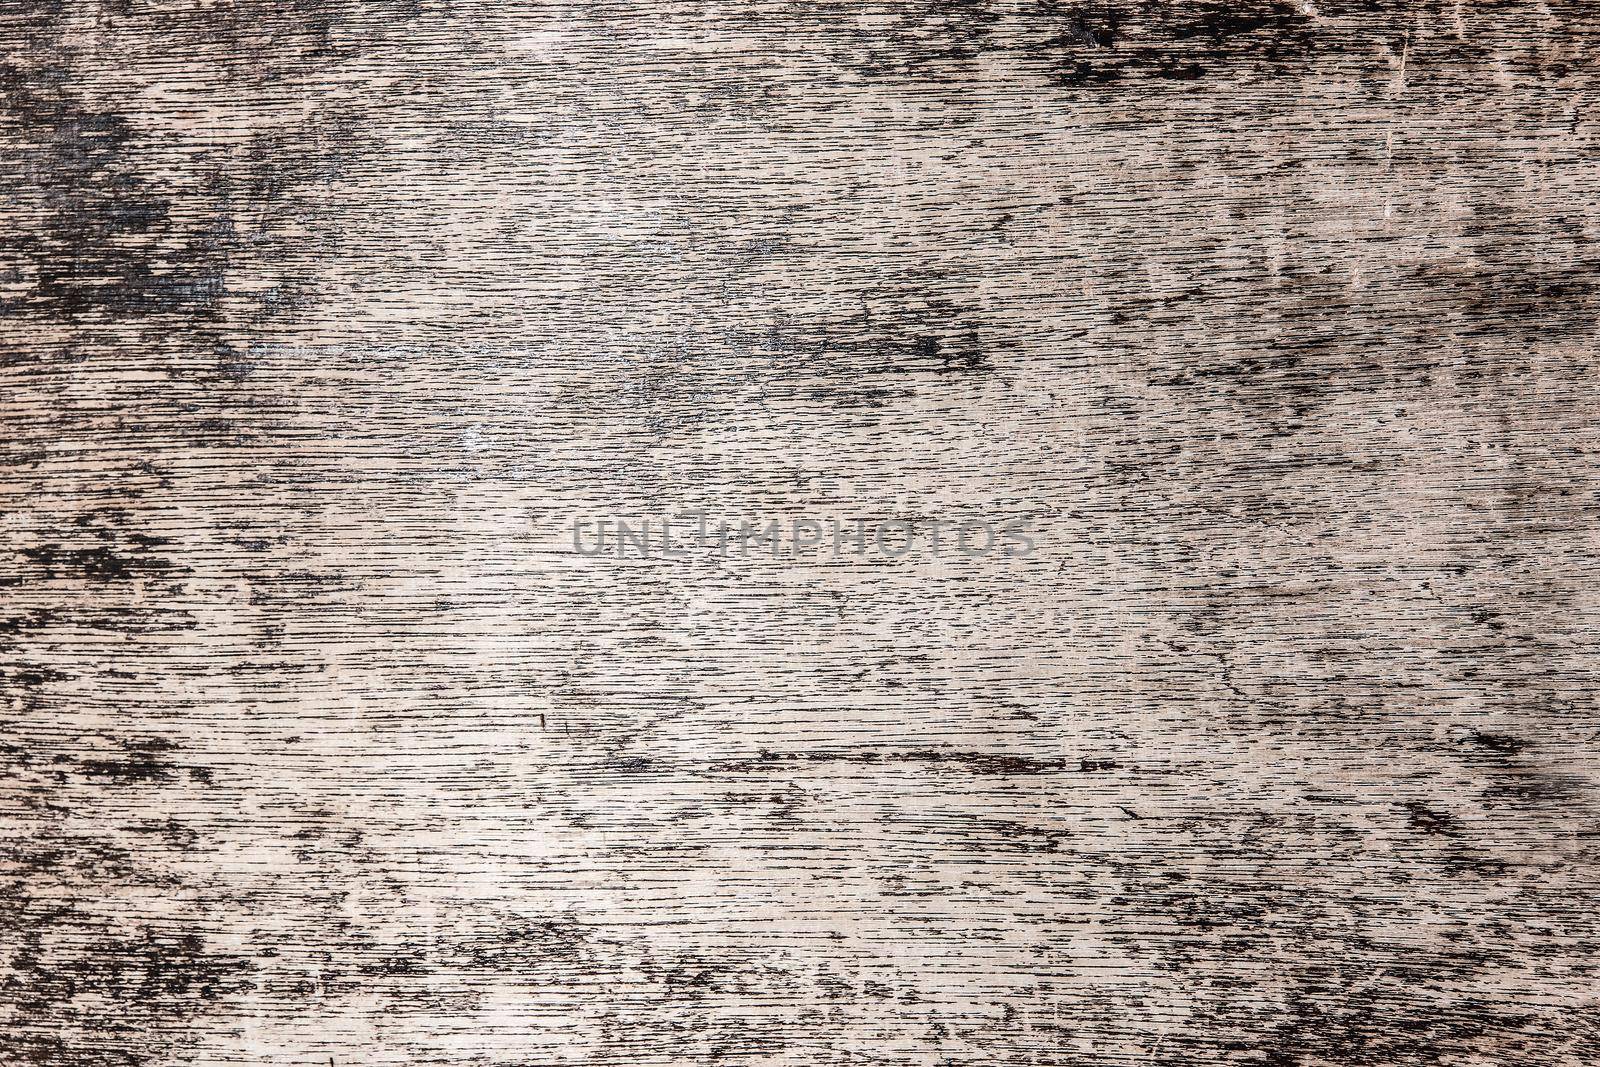 Wooden background texture by Mibuch